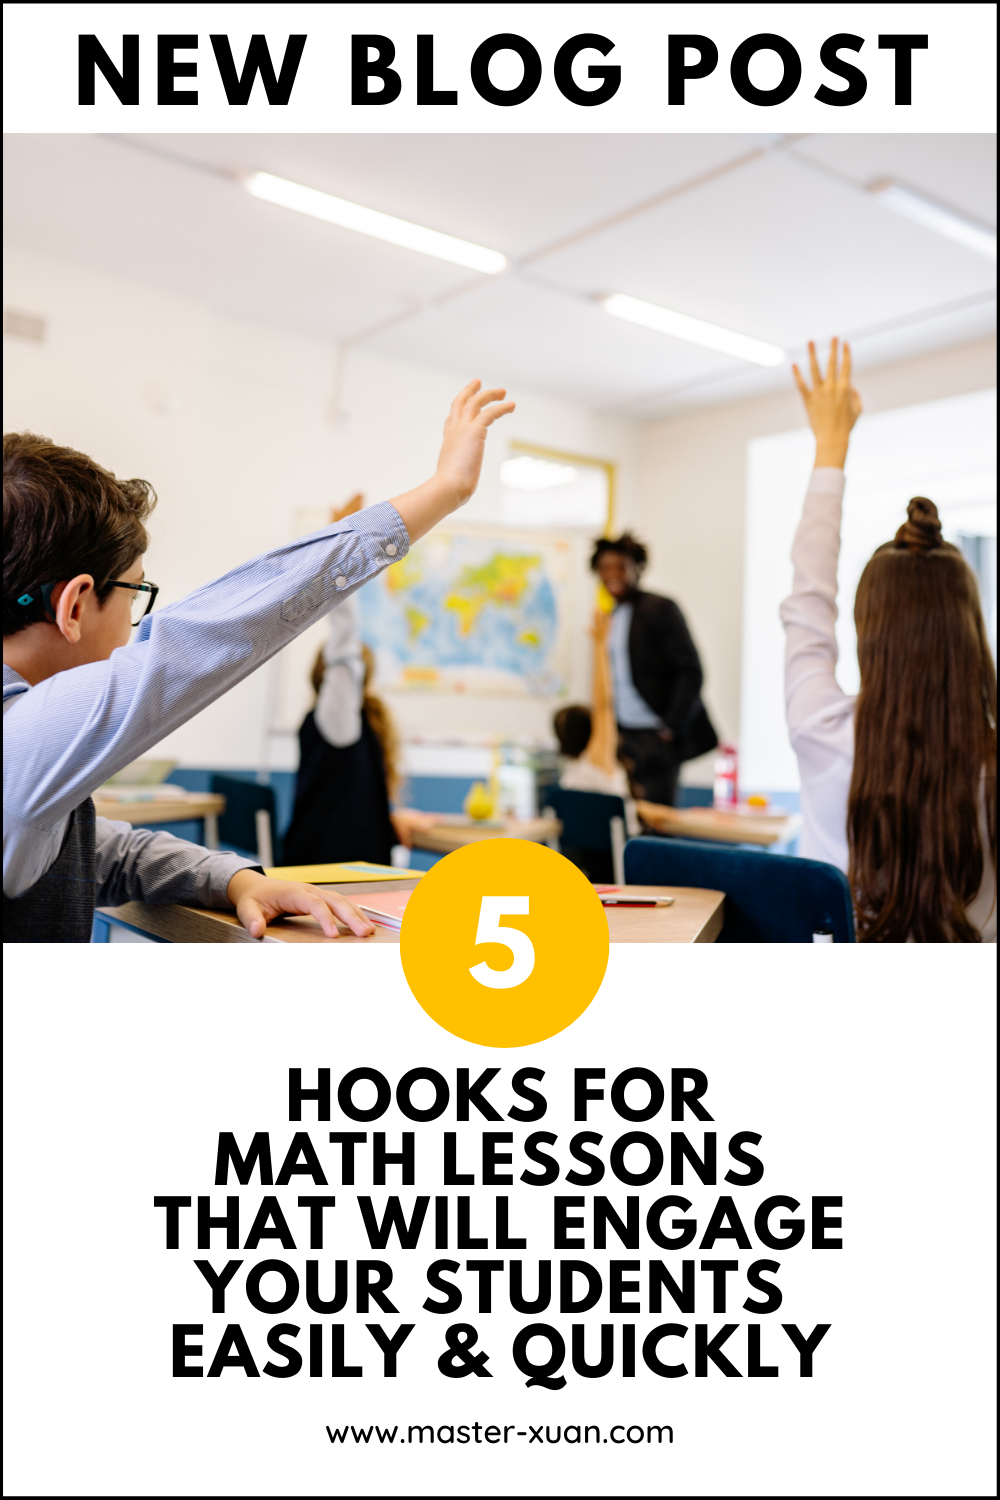 5 hooks for math lessons that will engage your students easily and quickly.